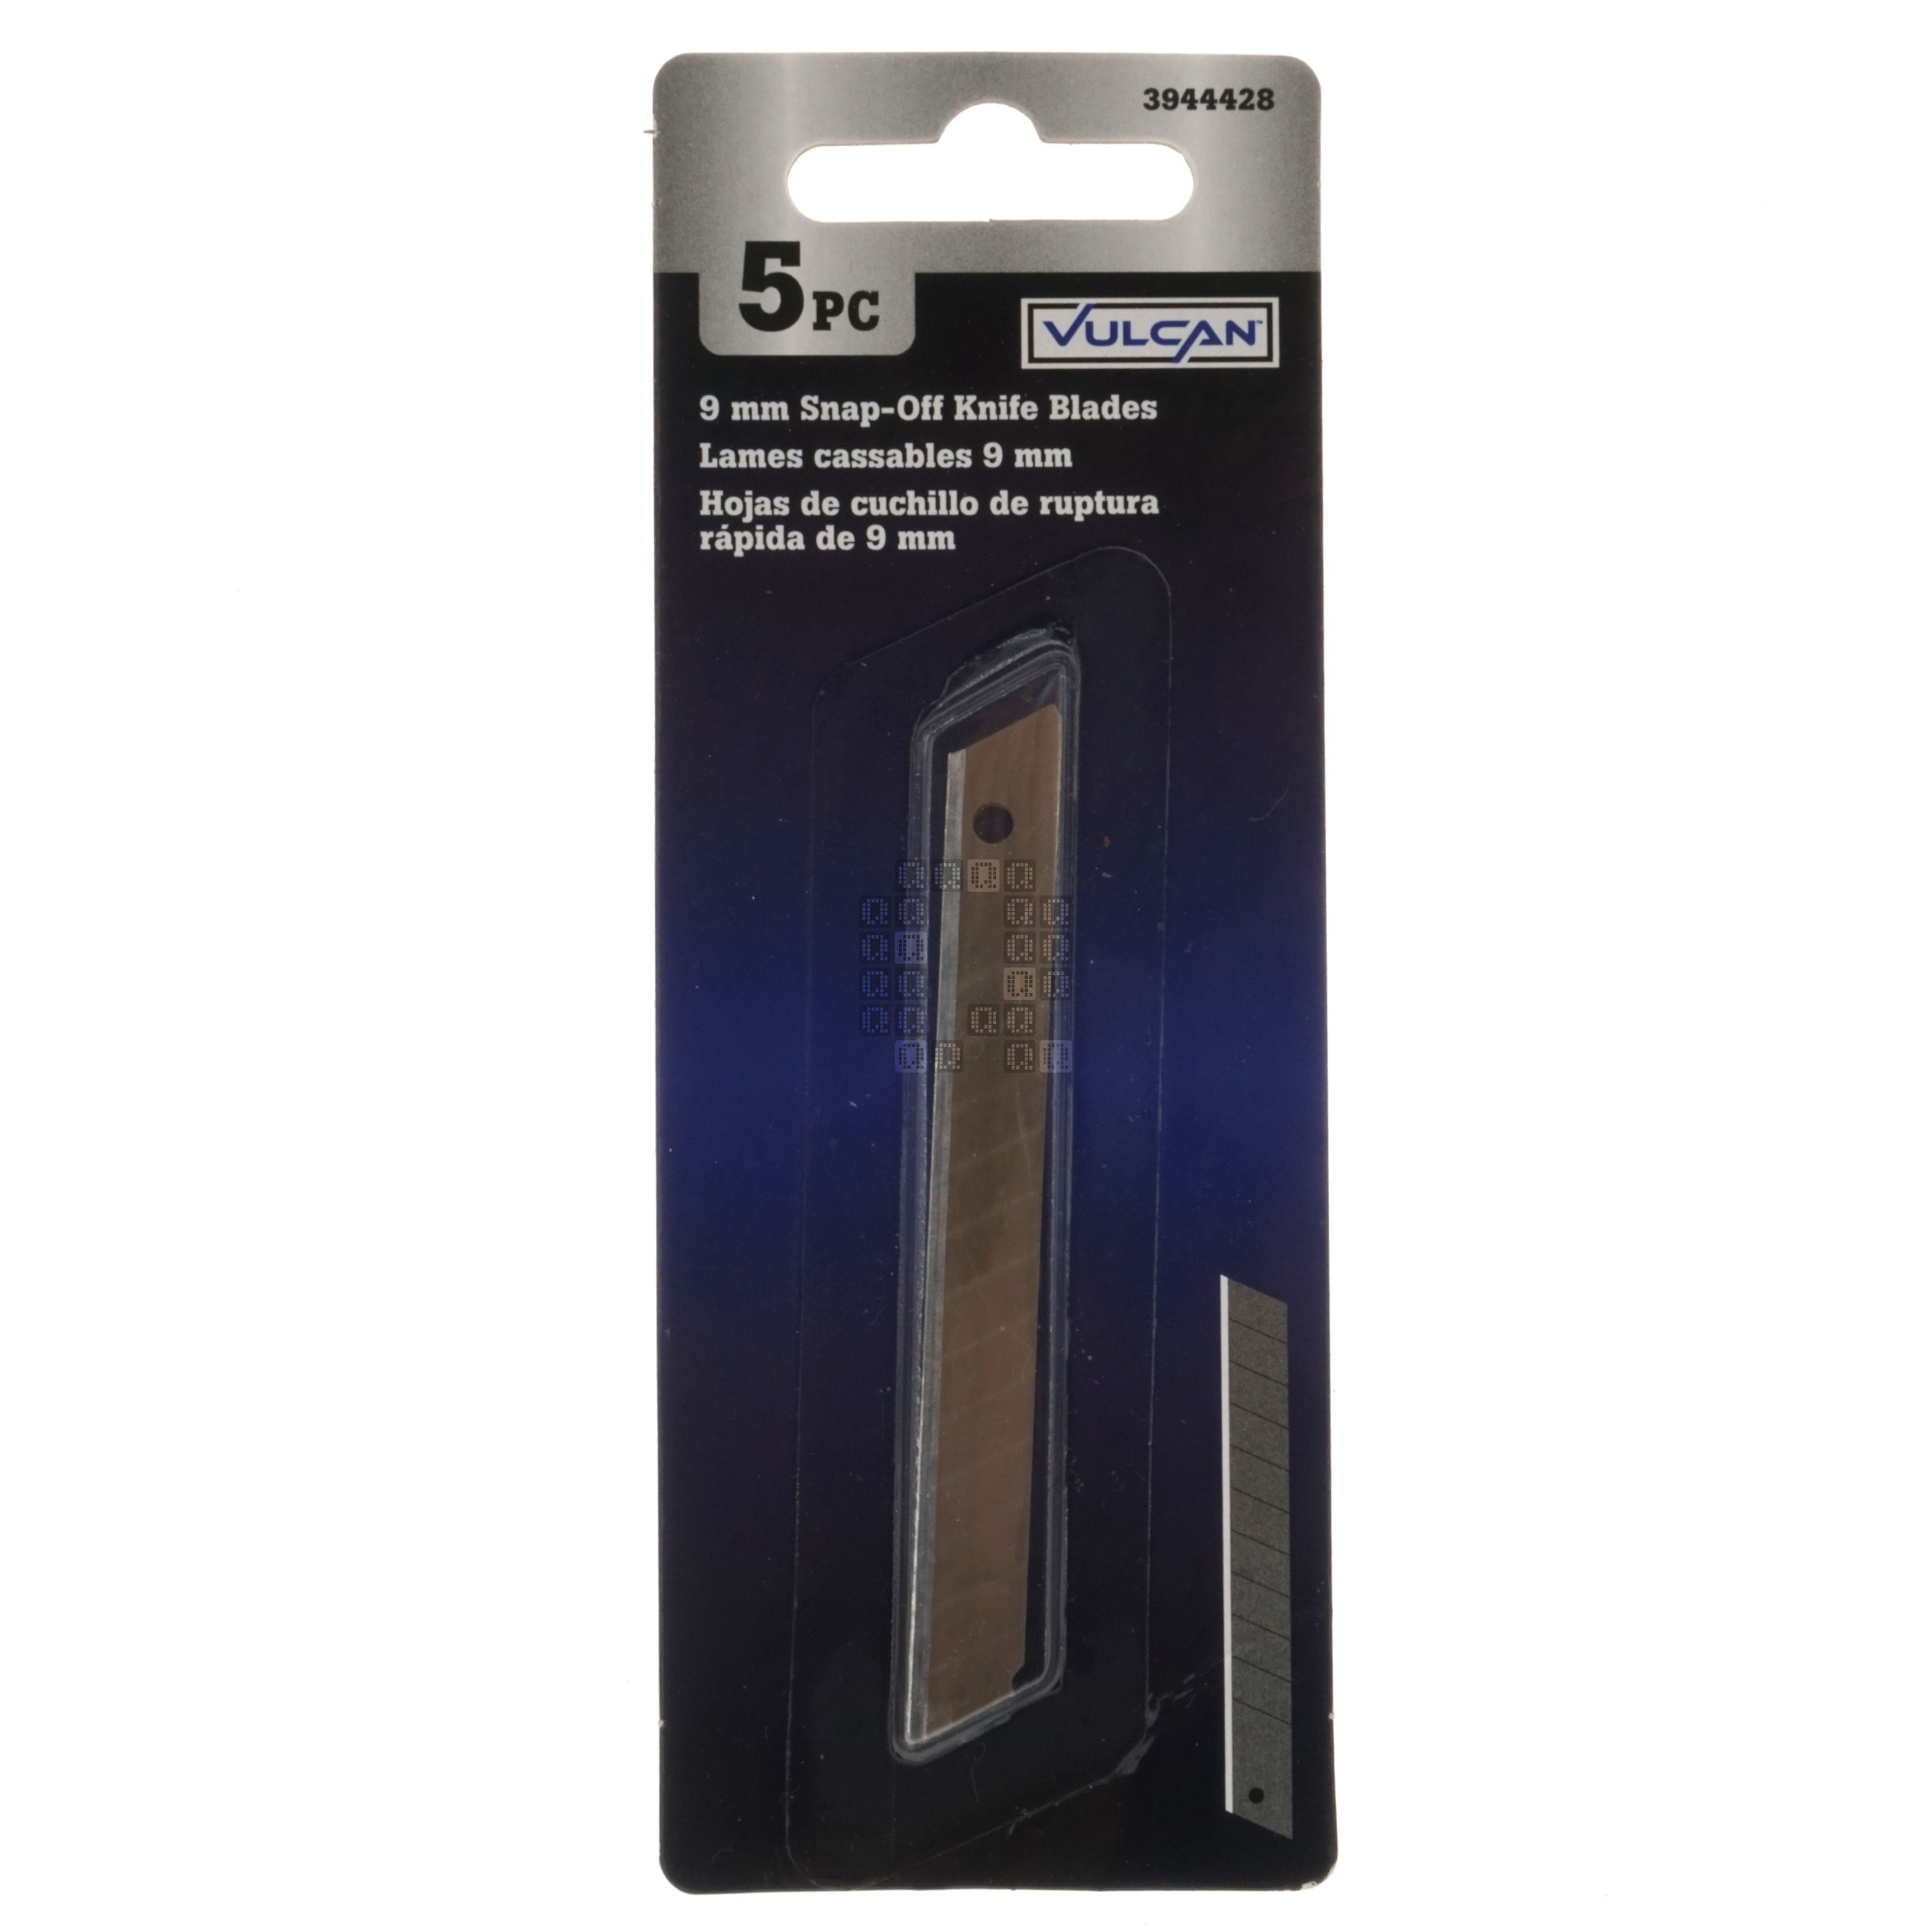 Vulcan 3944428 9mm Snap-Off Knife Blades, 5-Pack, 0.4mm Thickness